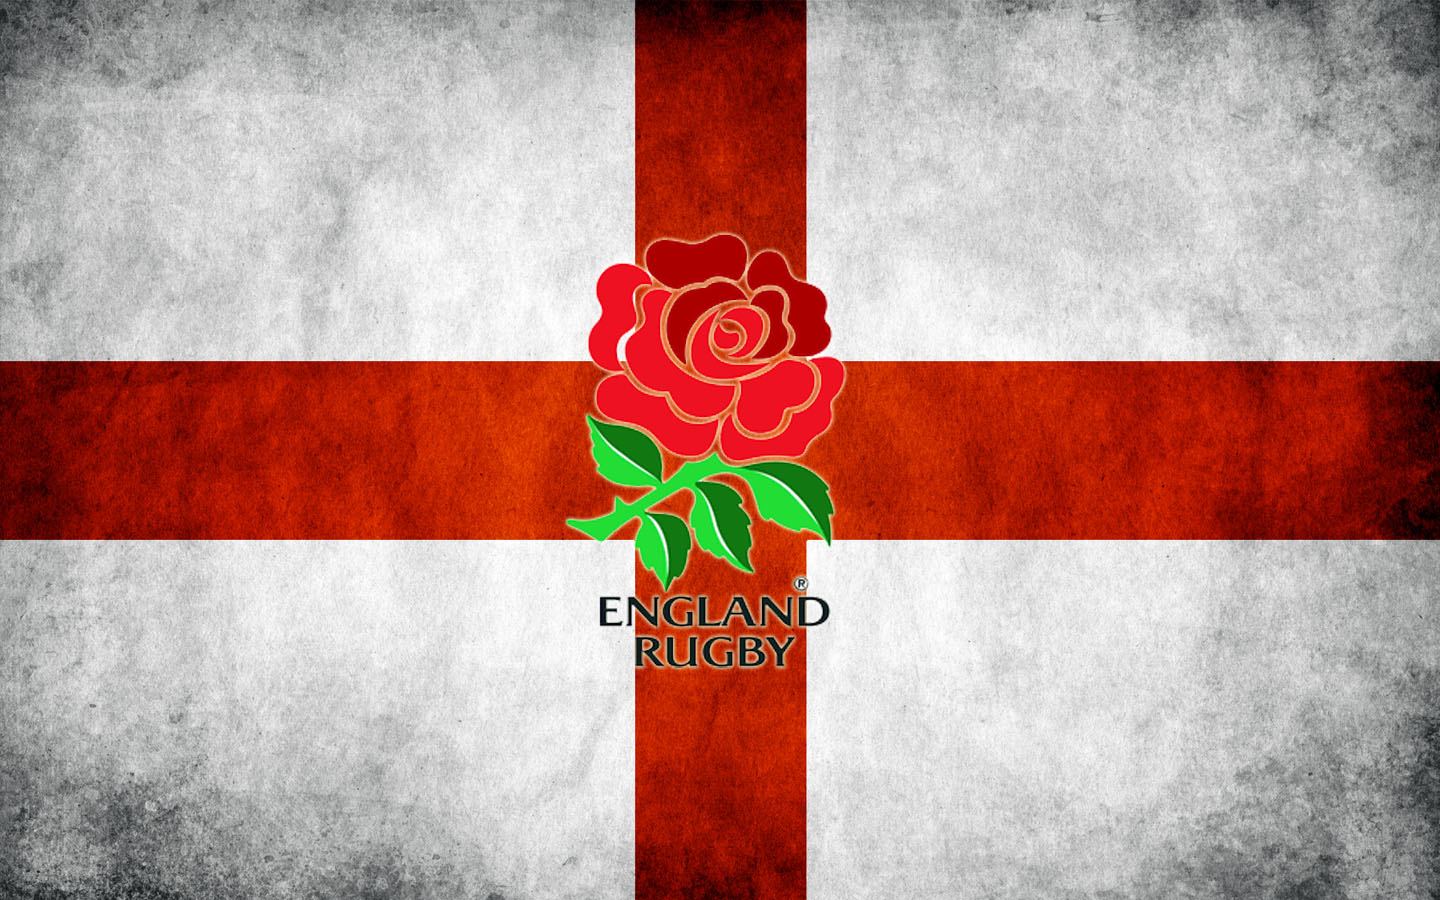 HD England Rugby Logo Wallpaper and image collection for Desktop